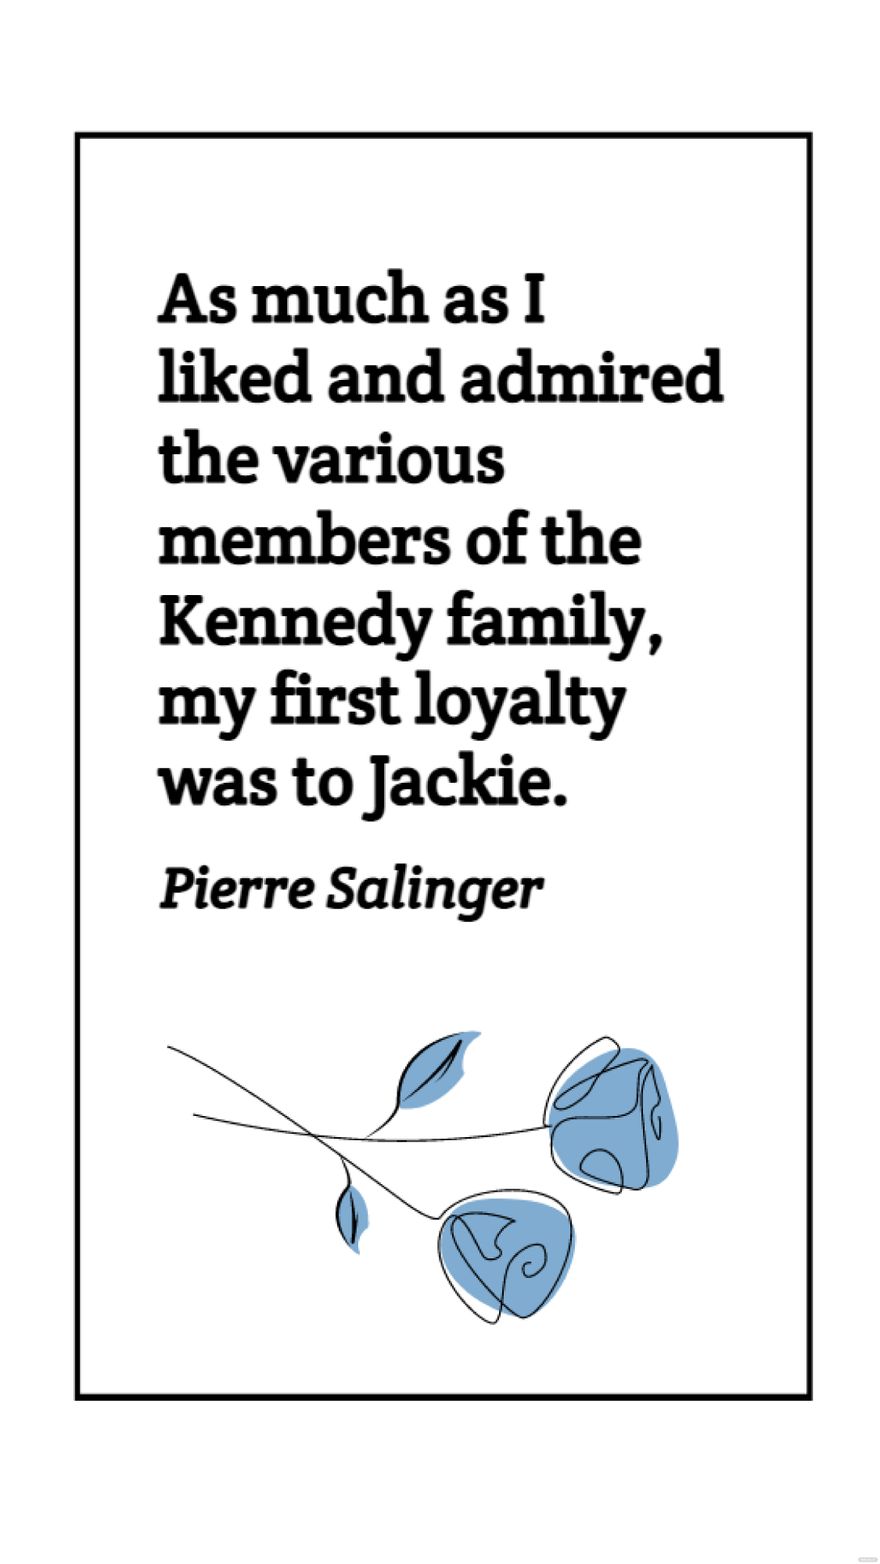 Free Pierre Salinger - As much as I liked and admired the various members of the Kennedy family, my first loyalty was to Jackie. in JPG